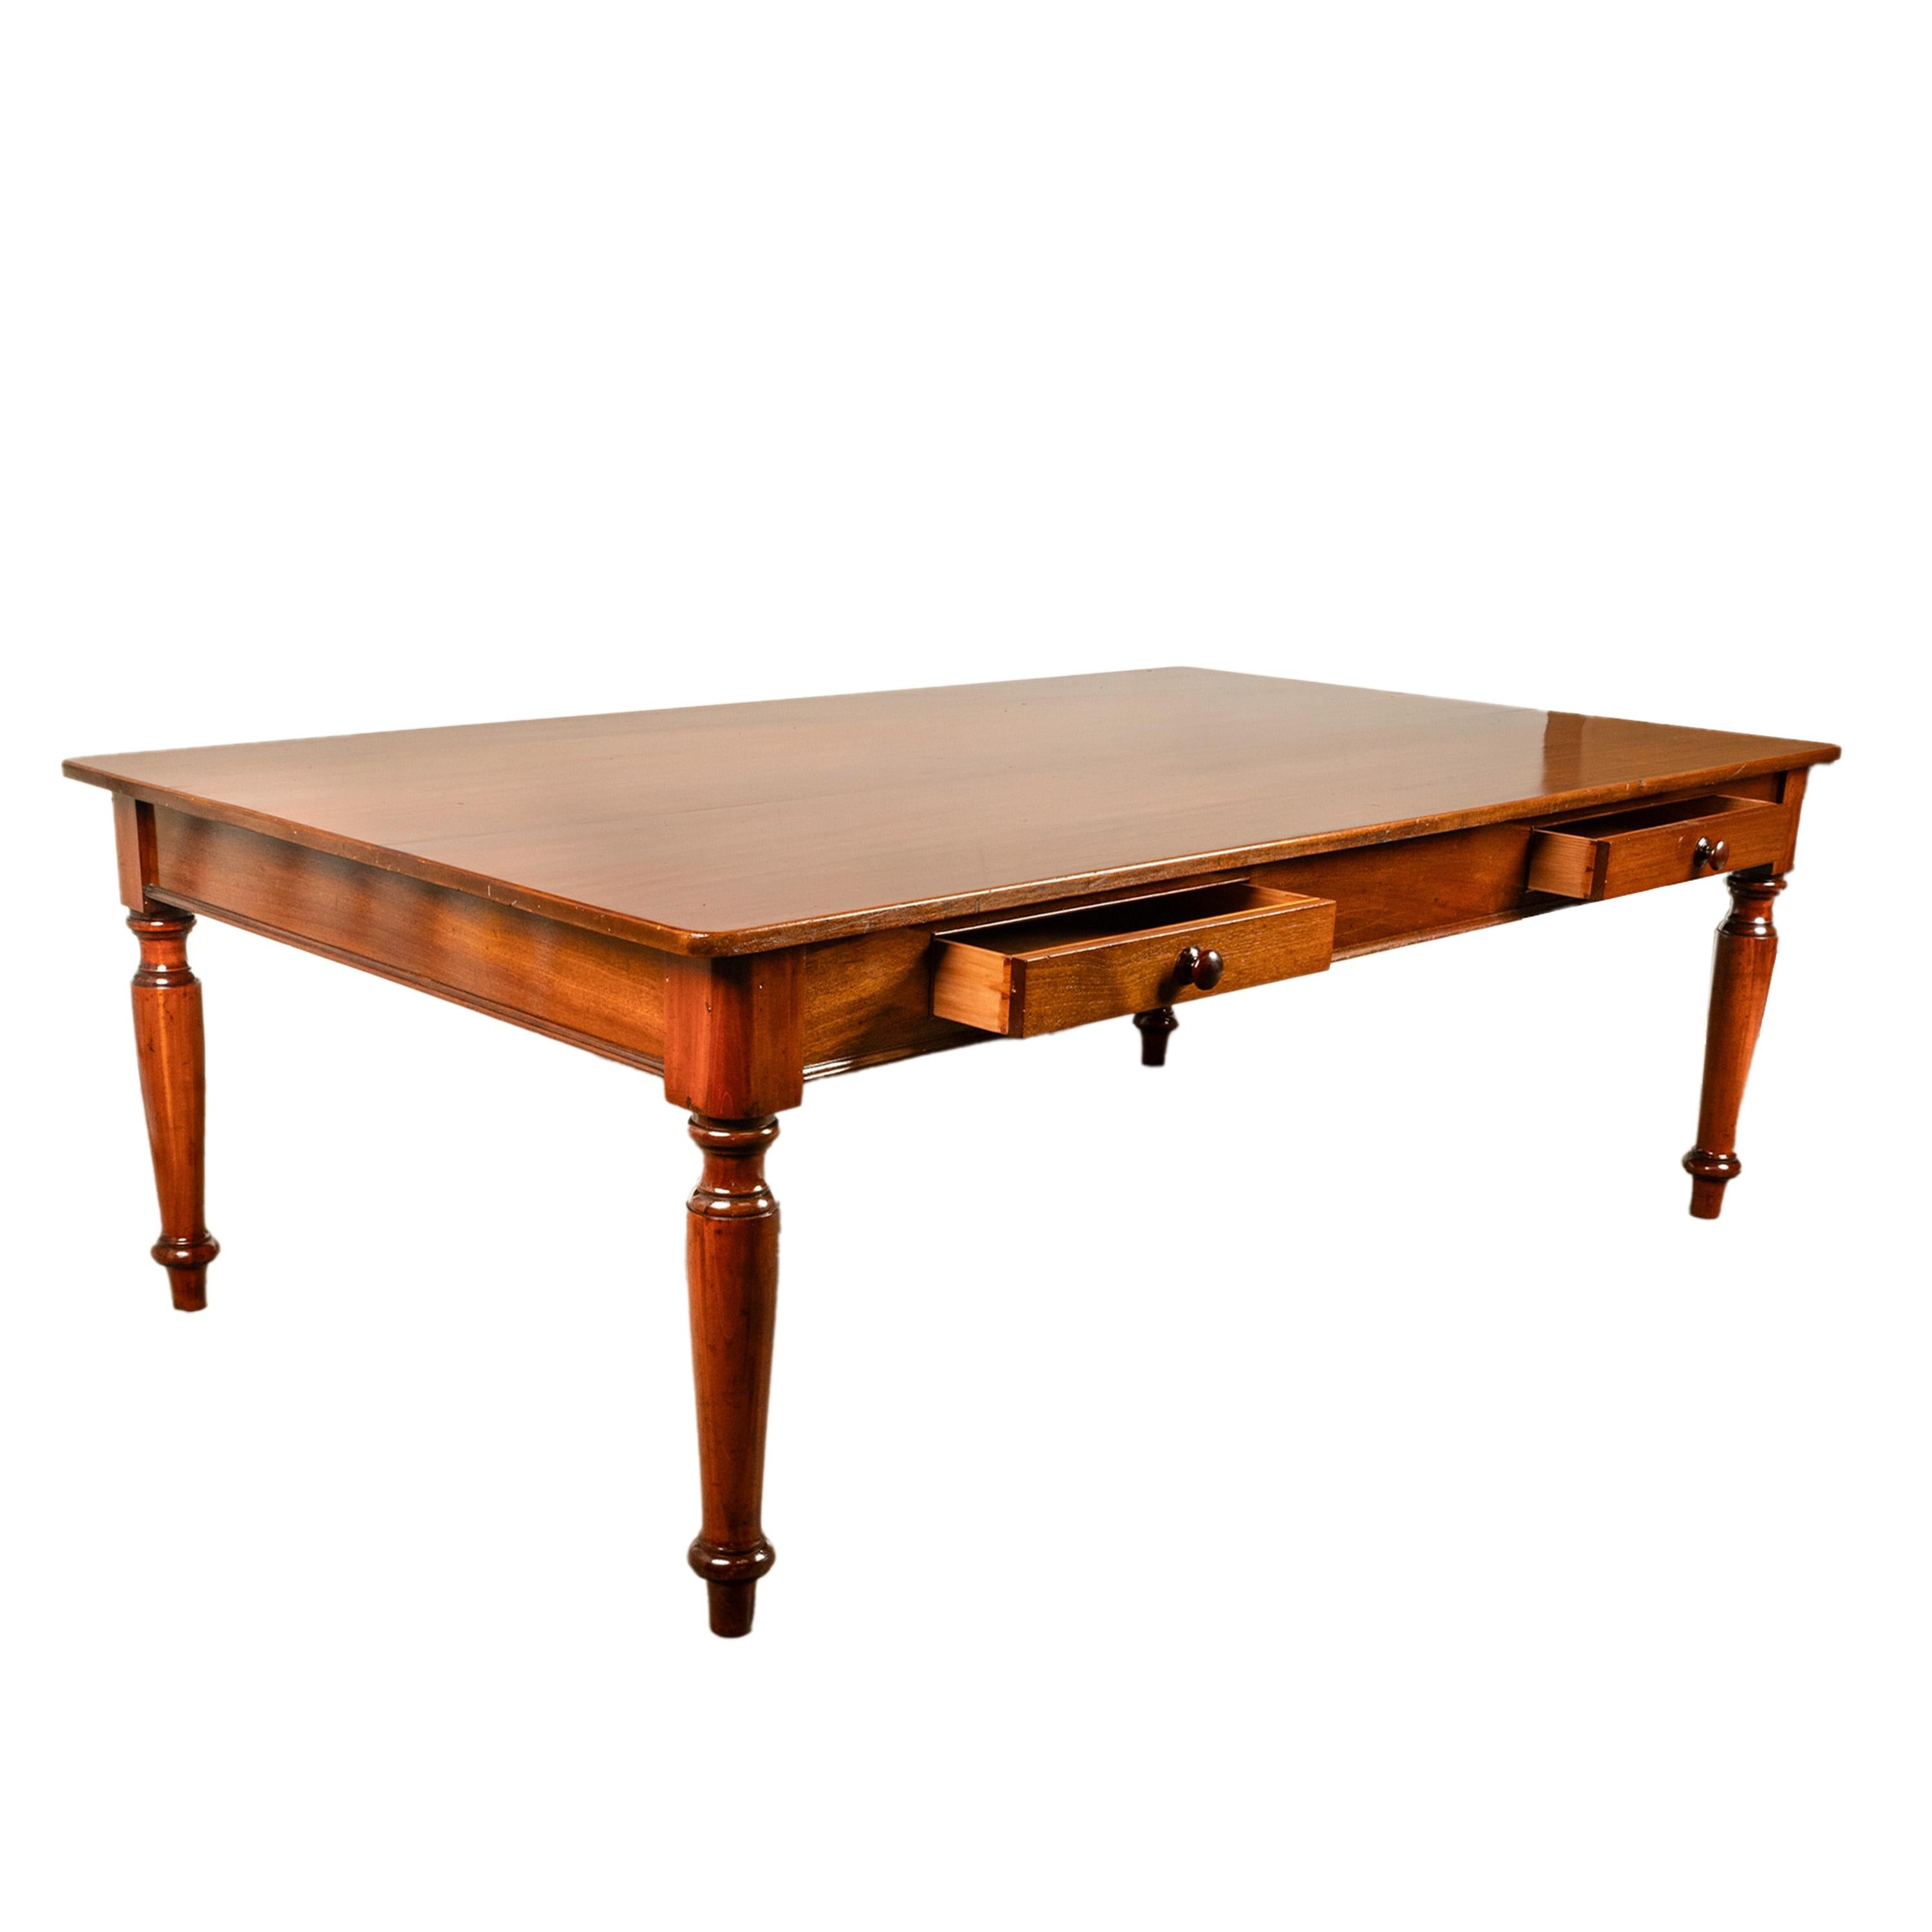 Antique Monumental 19th Century Mahogany Library Conference Dining Table 1860 For Sale 3